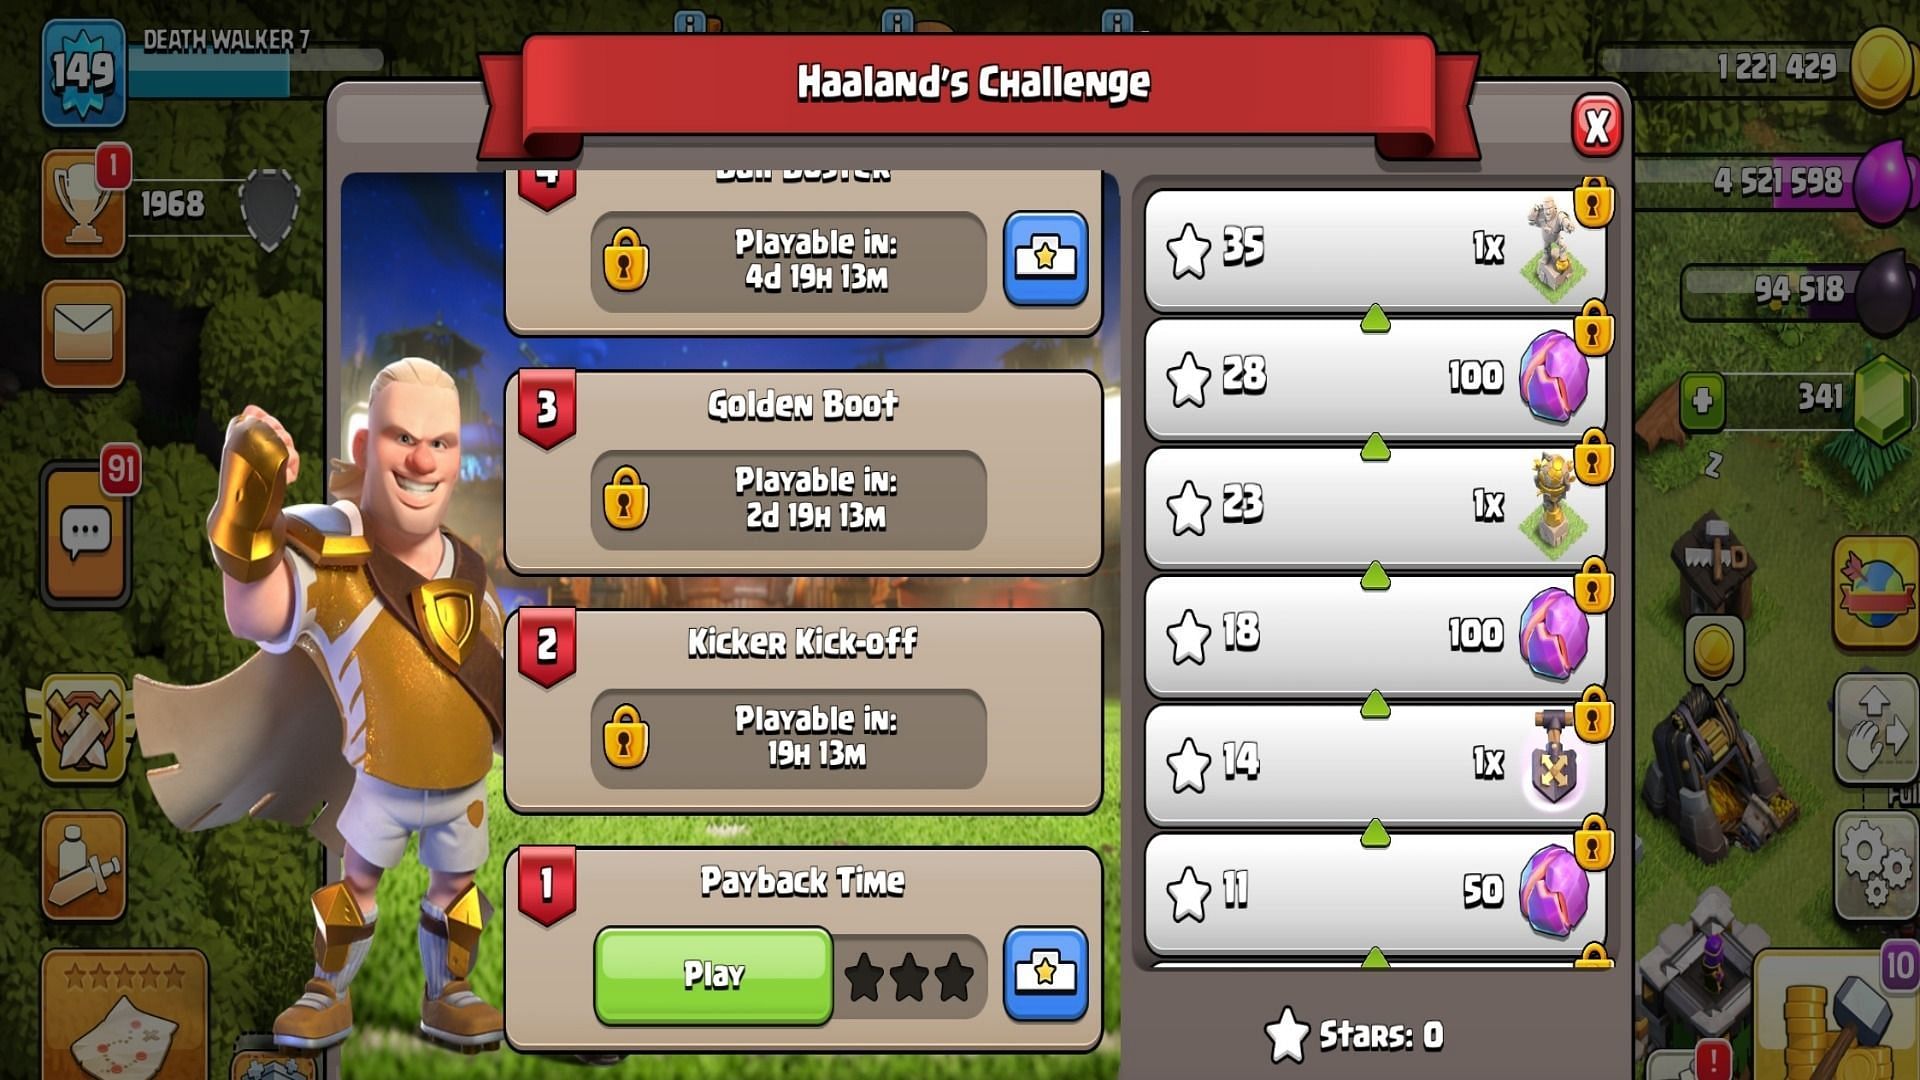 Challenges and rewards of Challenge Levels in Clash of Clans (Image via Supercell)